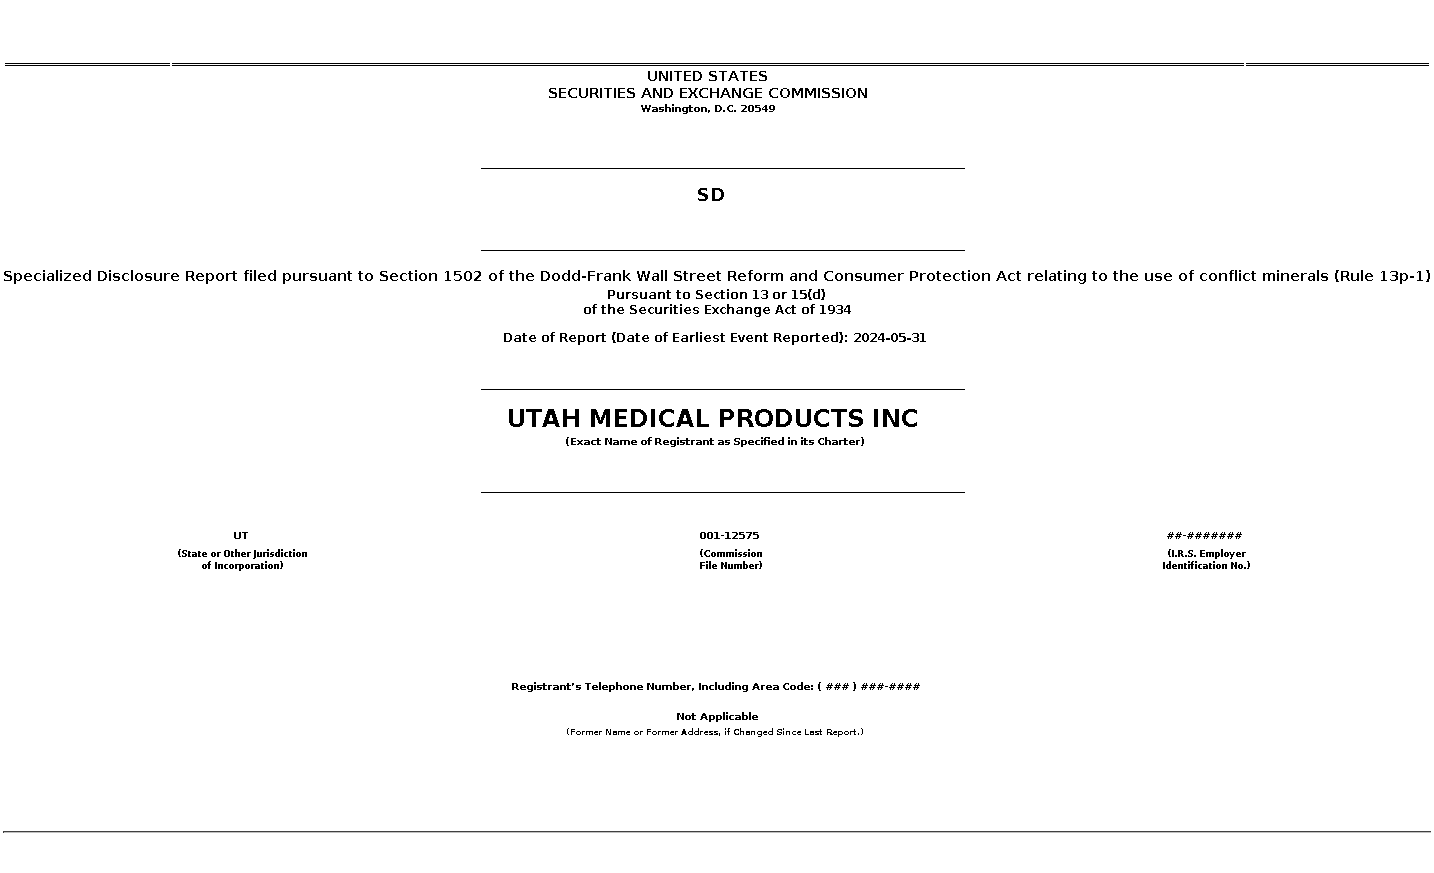 UTMD : SD Specialized Disclosure Report filed pursuant to Section 1502 of the Dodd-Frank Wall Street Reform and Consumer Protection Act relating to the use of conflict minerals (Rule 13p-1)